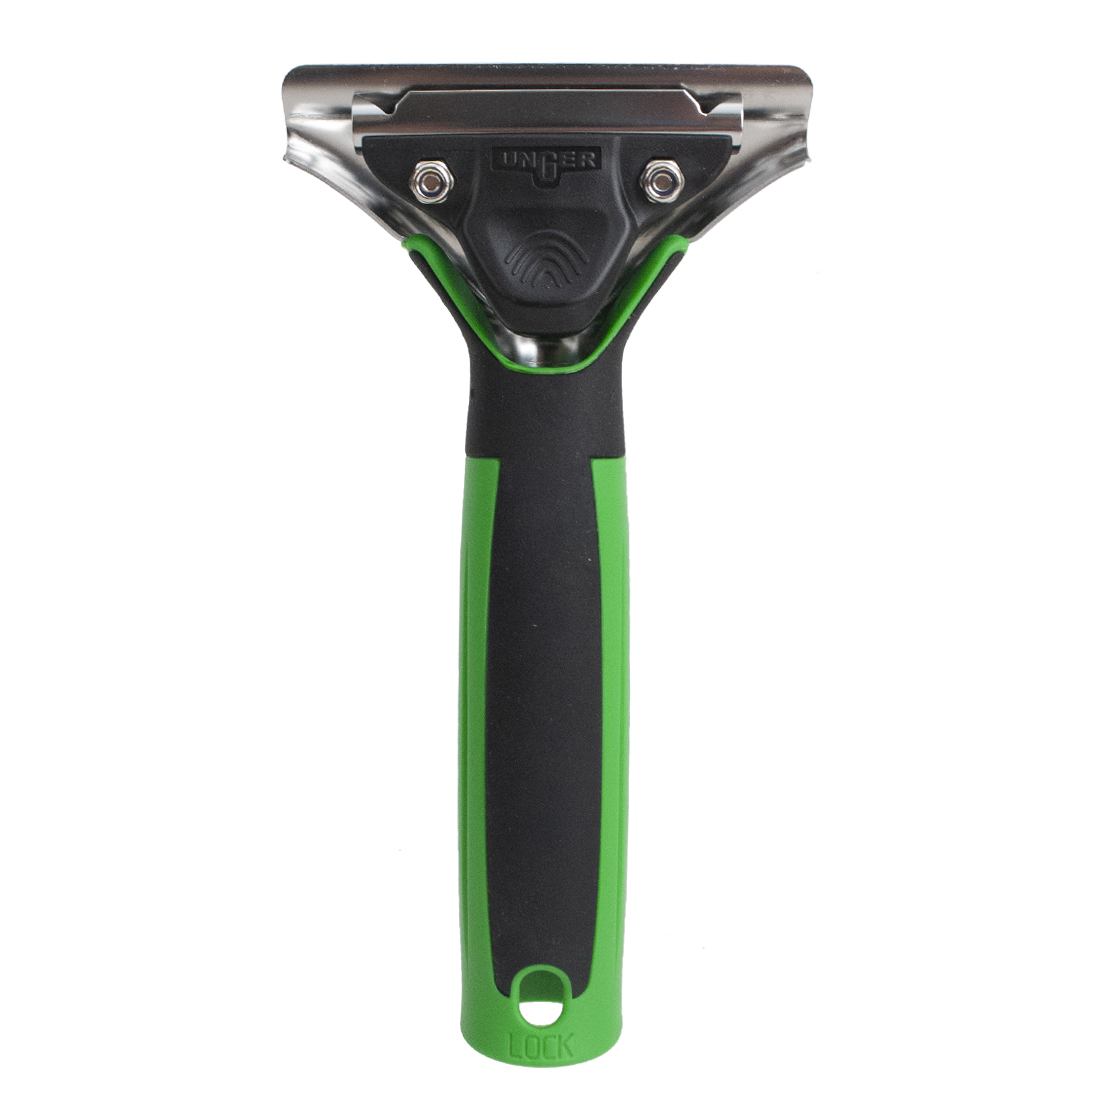 Unger Complete ErgoTec XL Squeegee Handle View